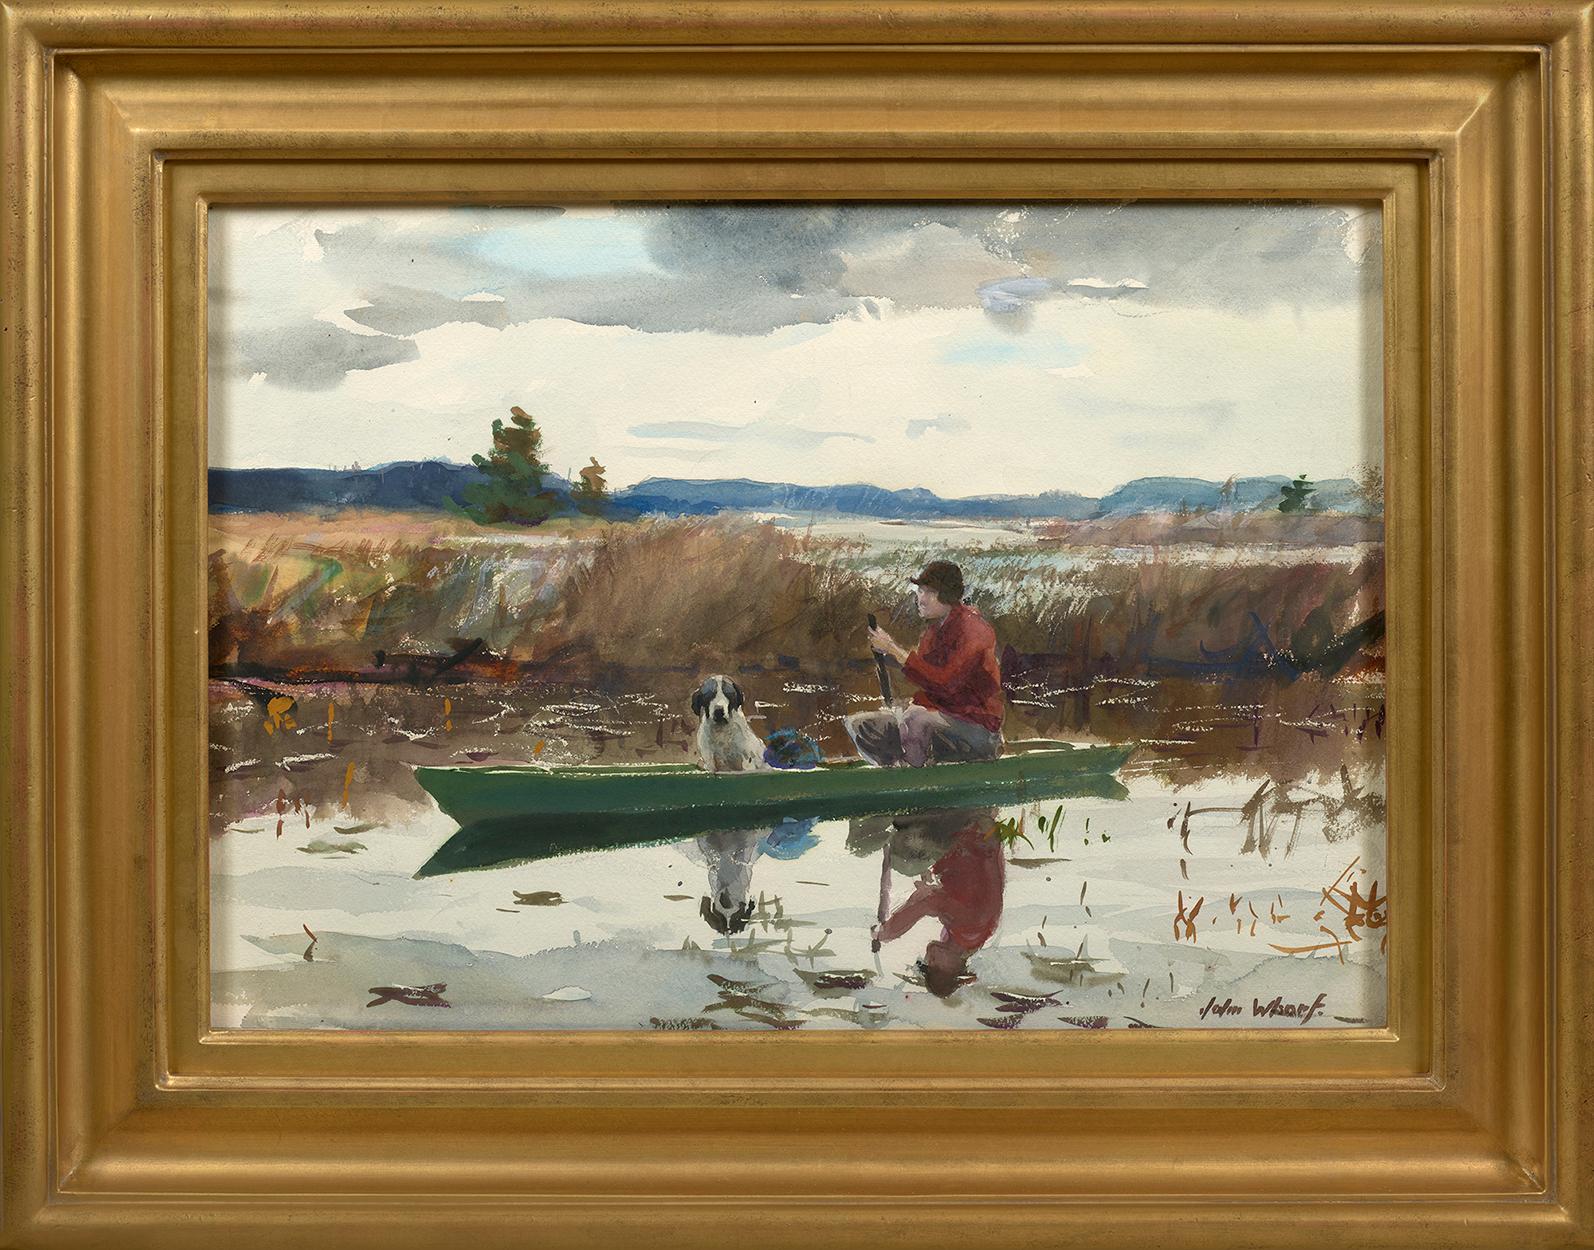 Swamp Country  - Painting by John Whorf